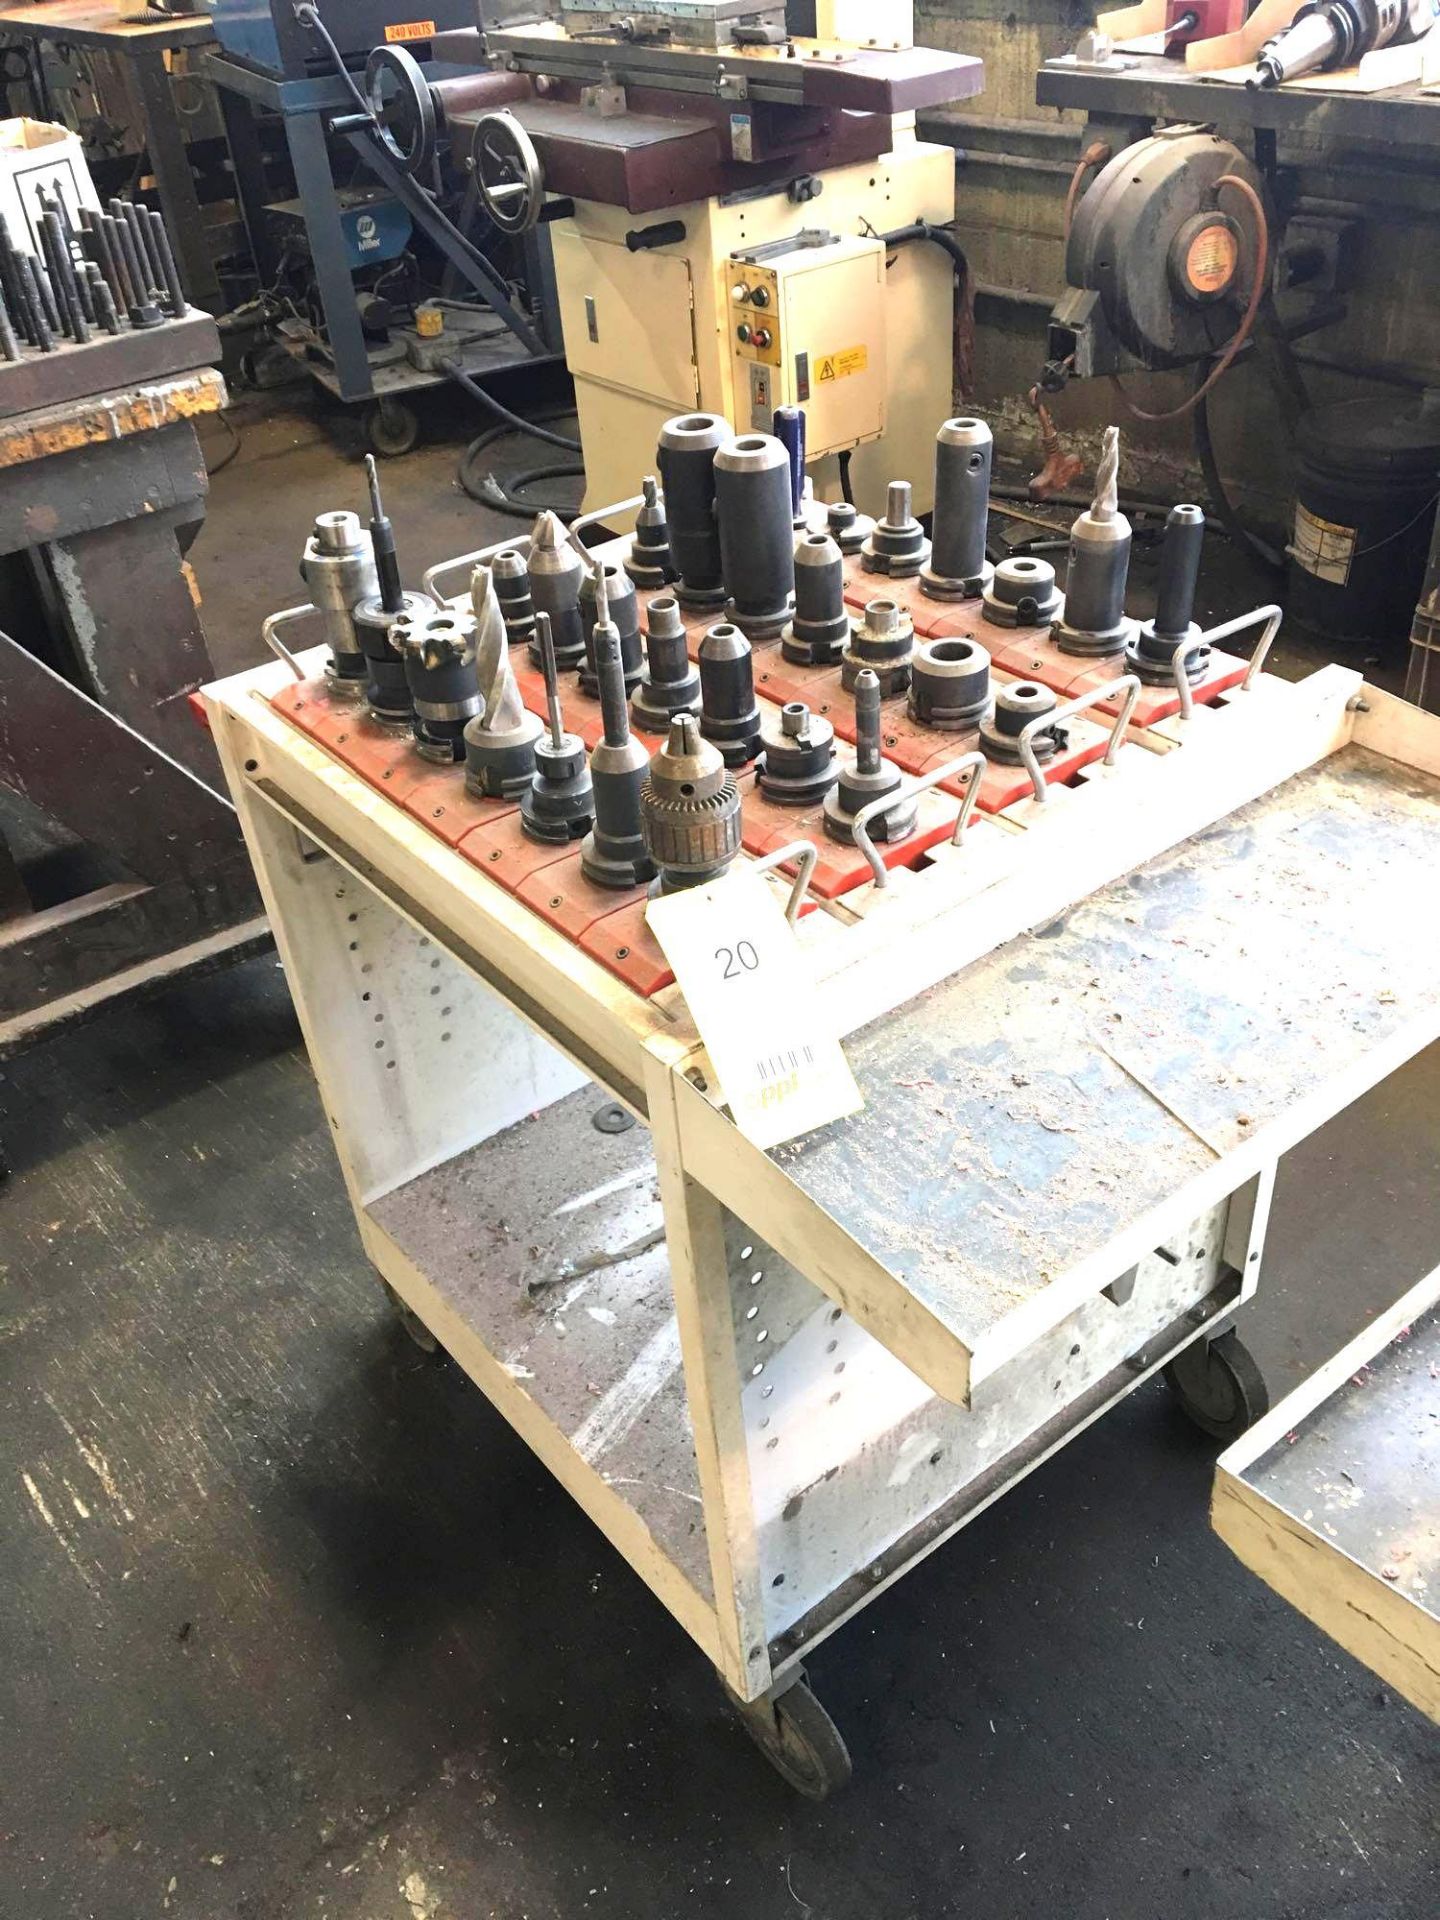 LOT: Assorted Rolling Tool Cart w/Approximately 28 Pieces Cat 40 Tool Holders and Assorted Tooling